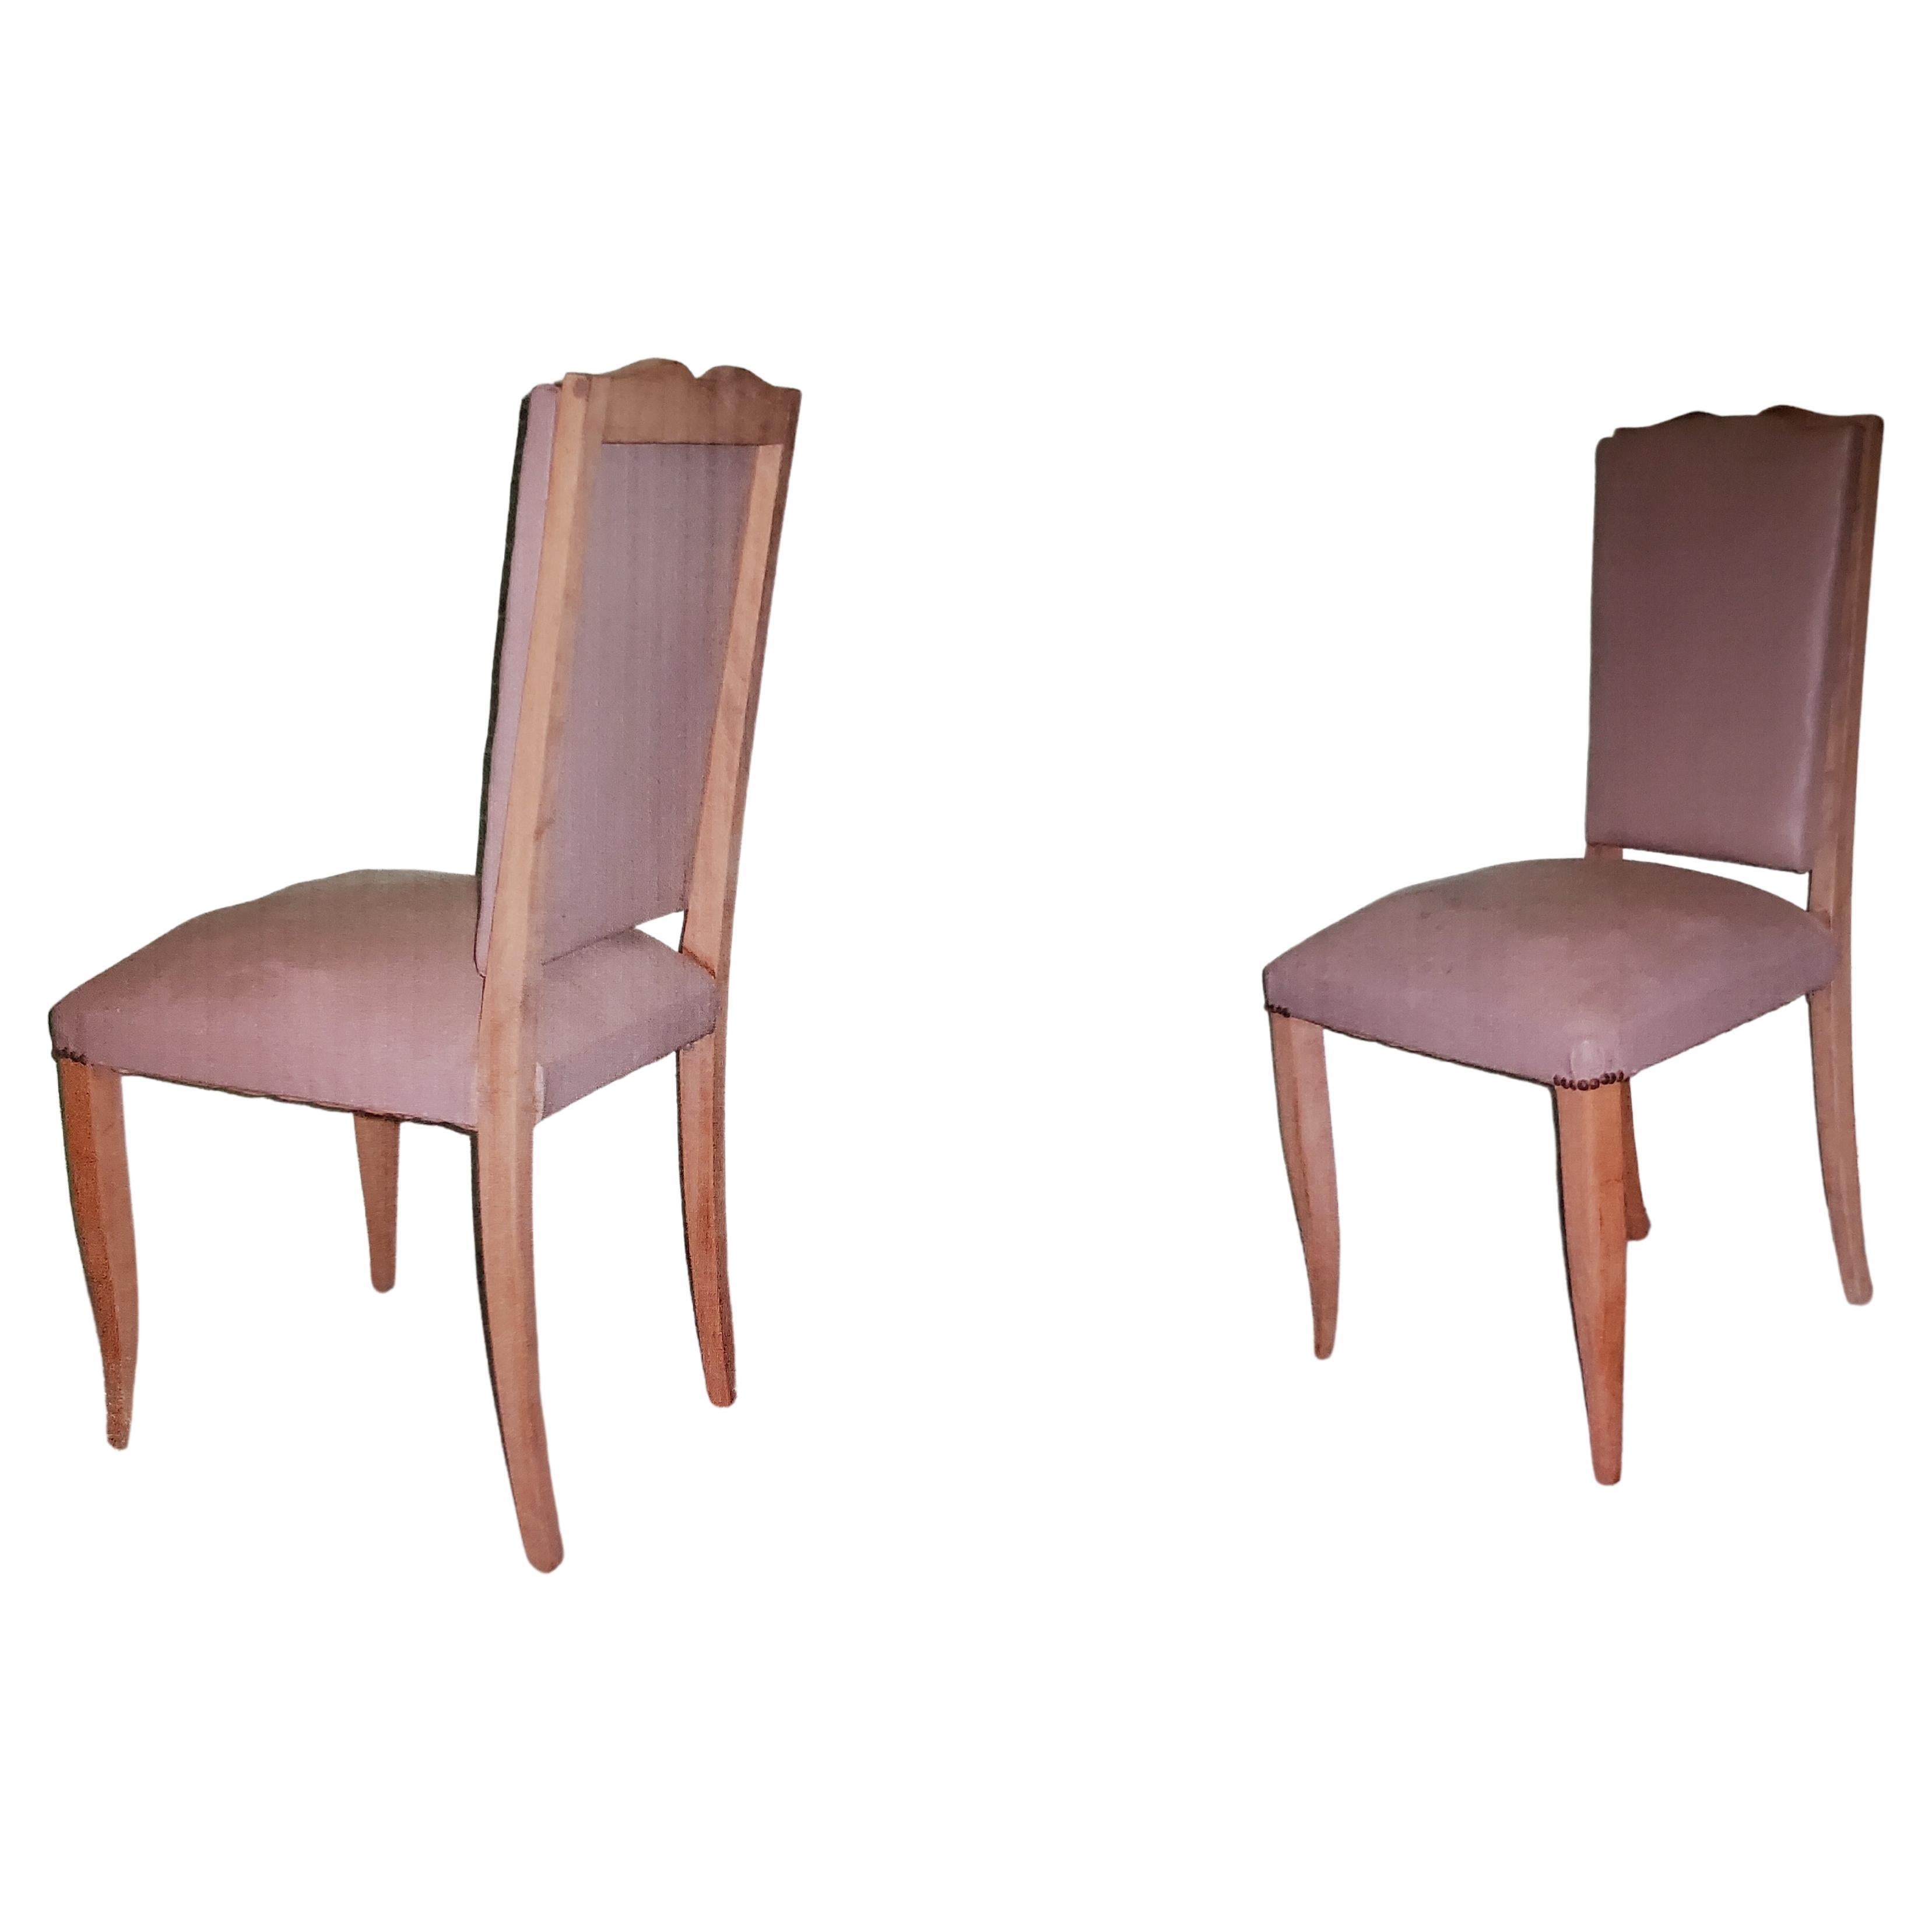 A set of six original French 1940's dining chairs 
Curvilinear, moustache shaped top crest and rectangular shaped lower backrest, featuring elegant cabriole front legs and slightly tapered sculptural splay back legs.
The cushion seats and backs in